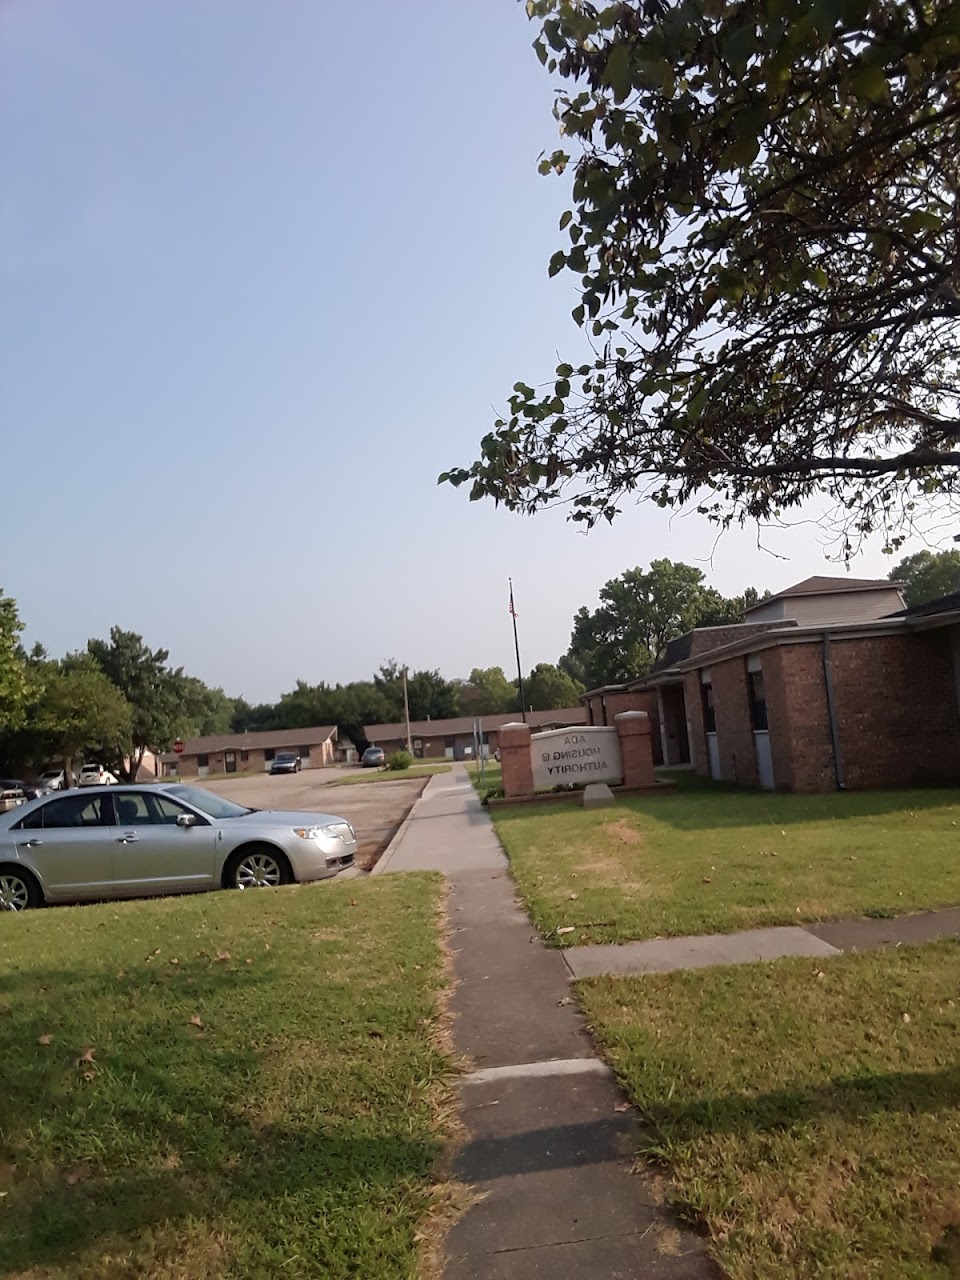 Photo of Housing Authority of the City of Ada. Affordable housing located at 1100 N. STOCKTON ADA, OK 74820